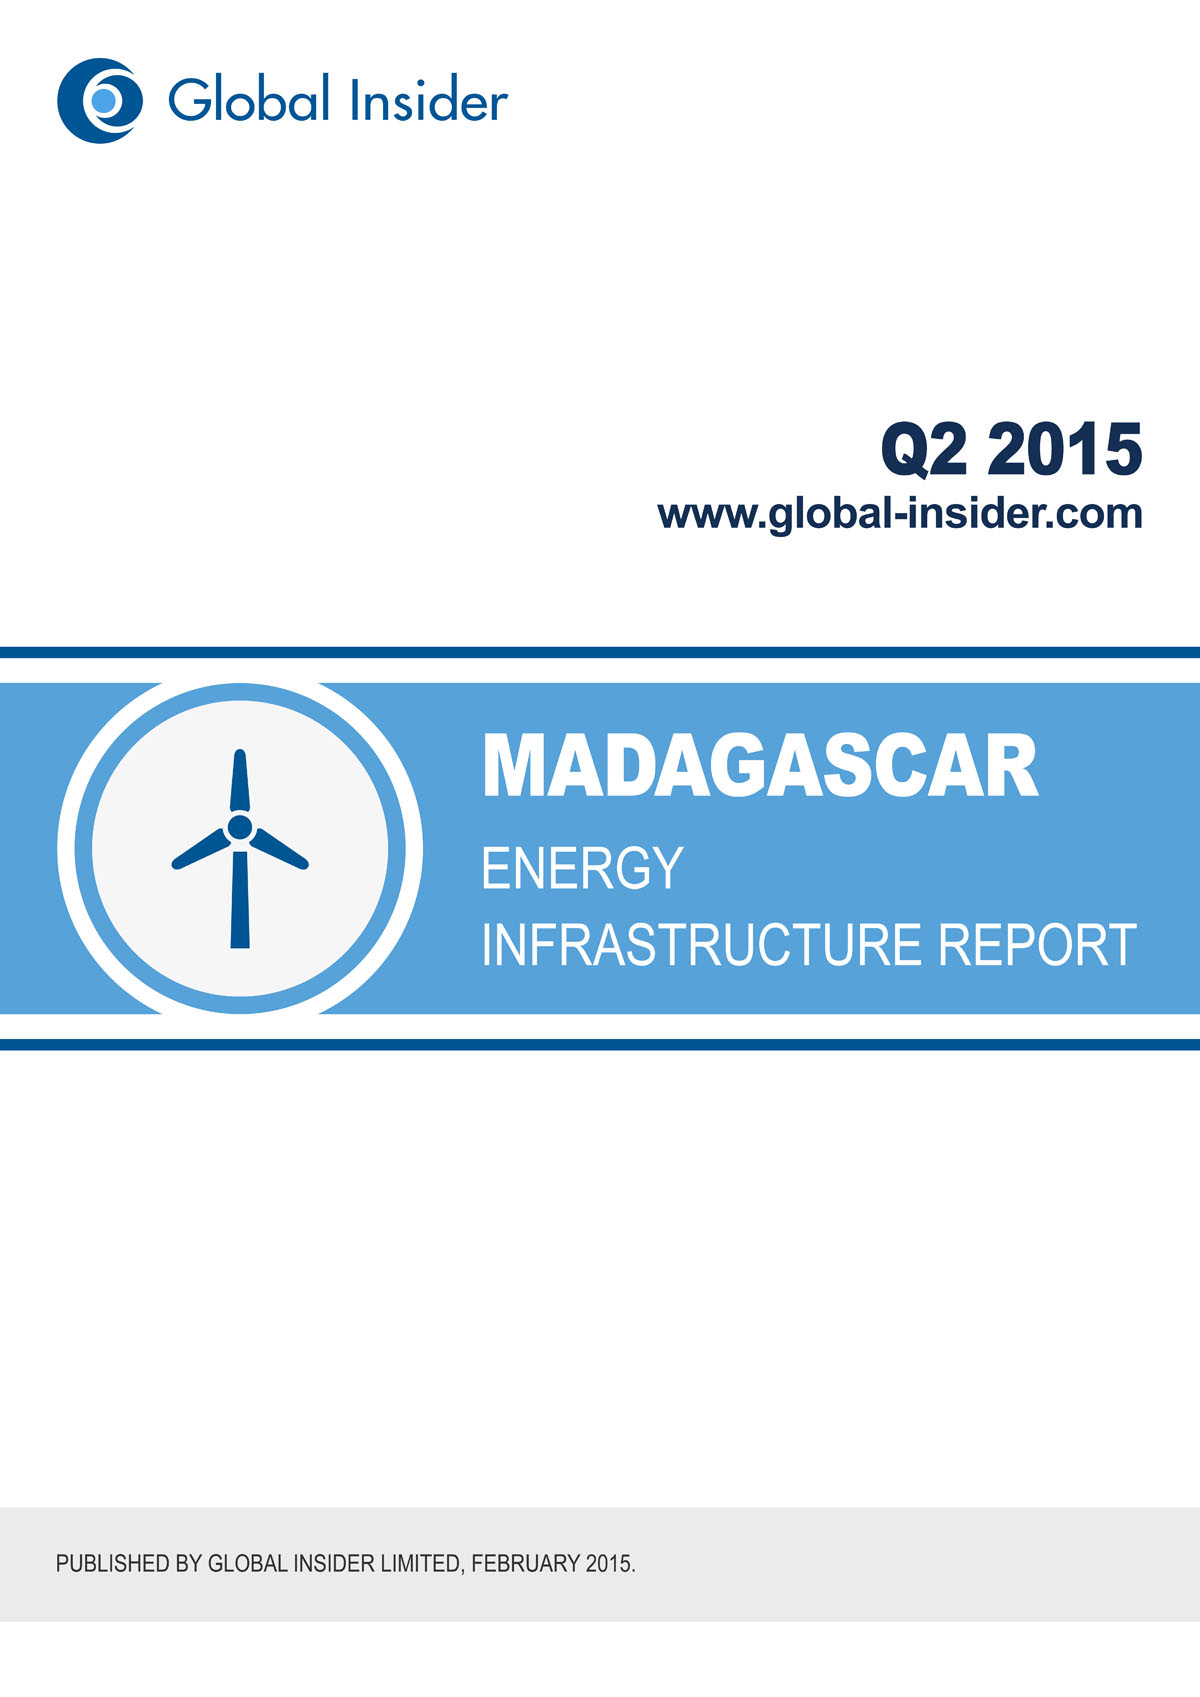 Madagascar Energy Infrastructure Report